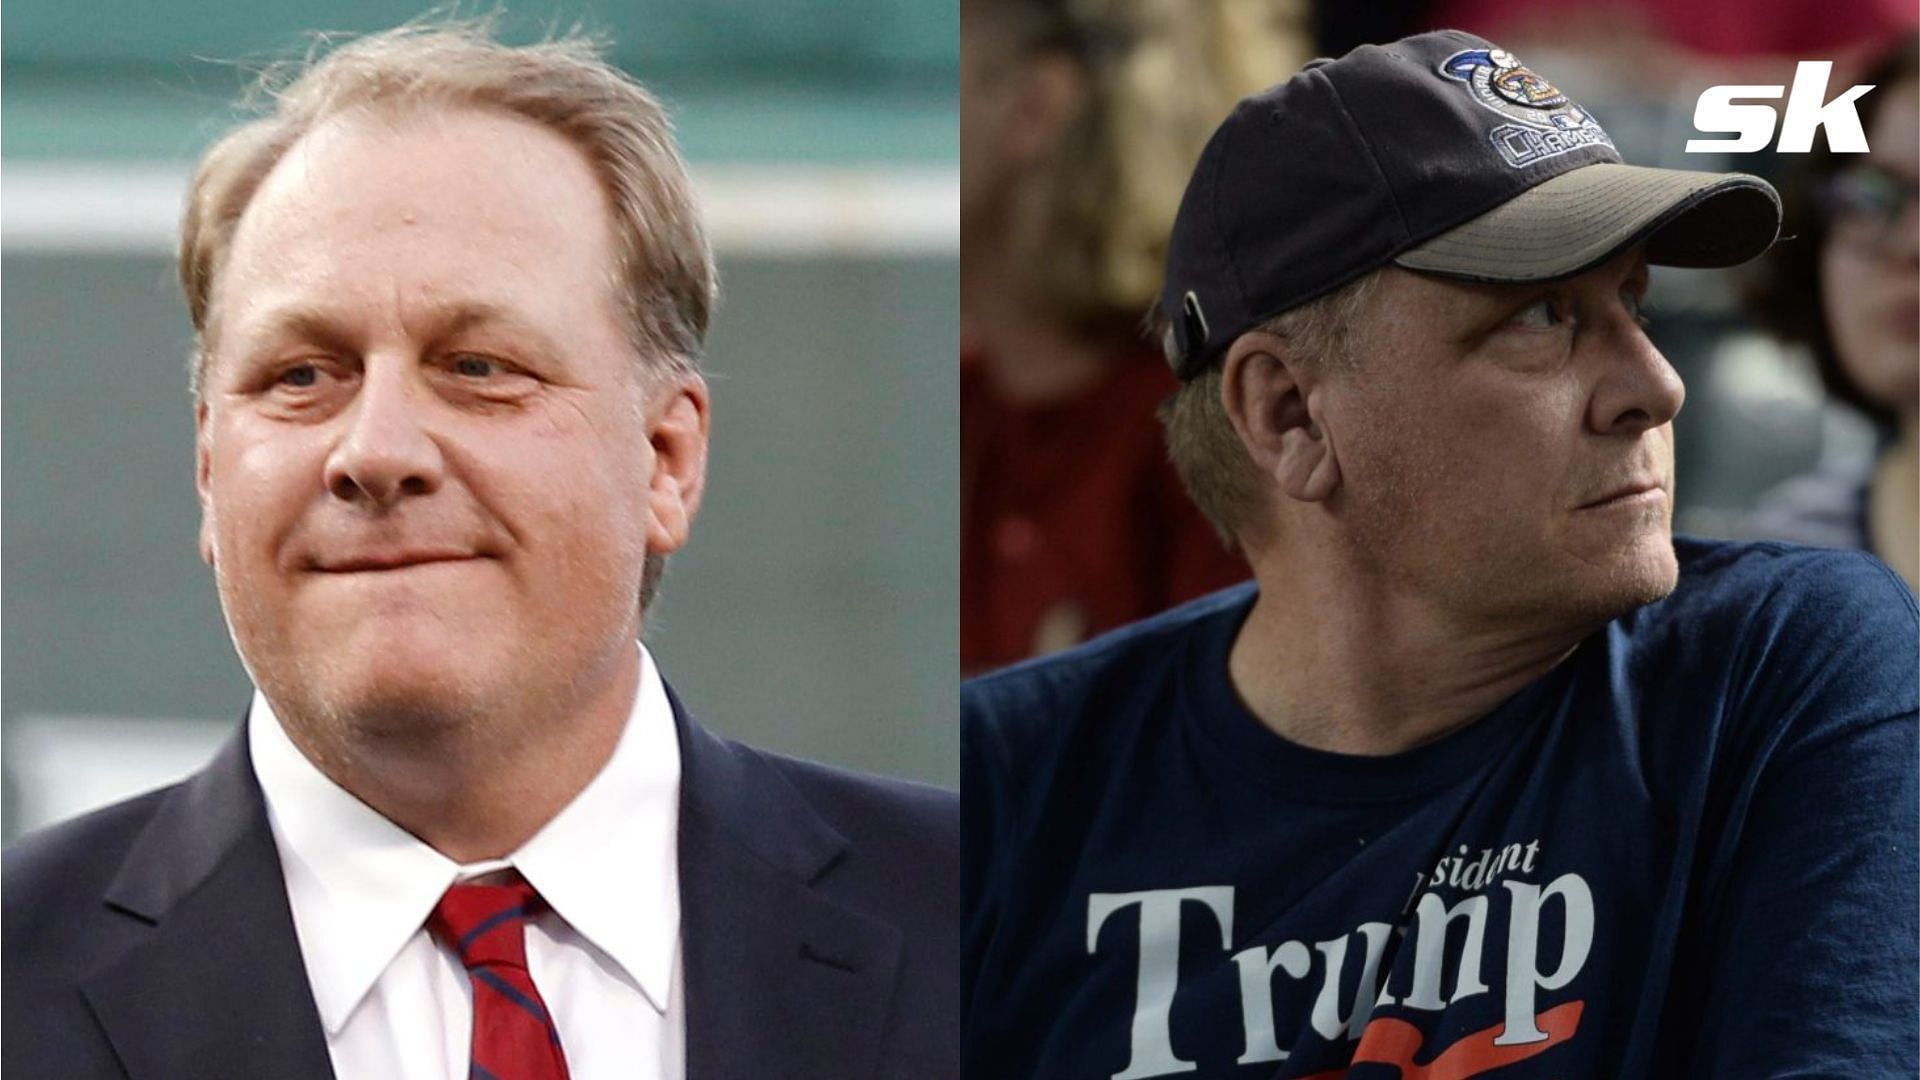 Curt Schilling felt that his conservative politics led to his Hall of Fame snub